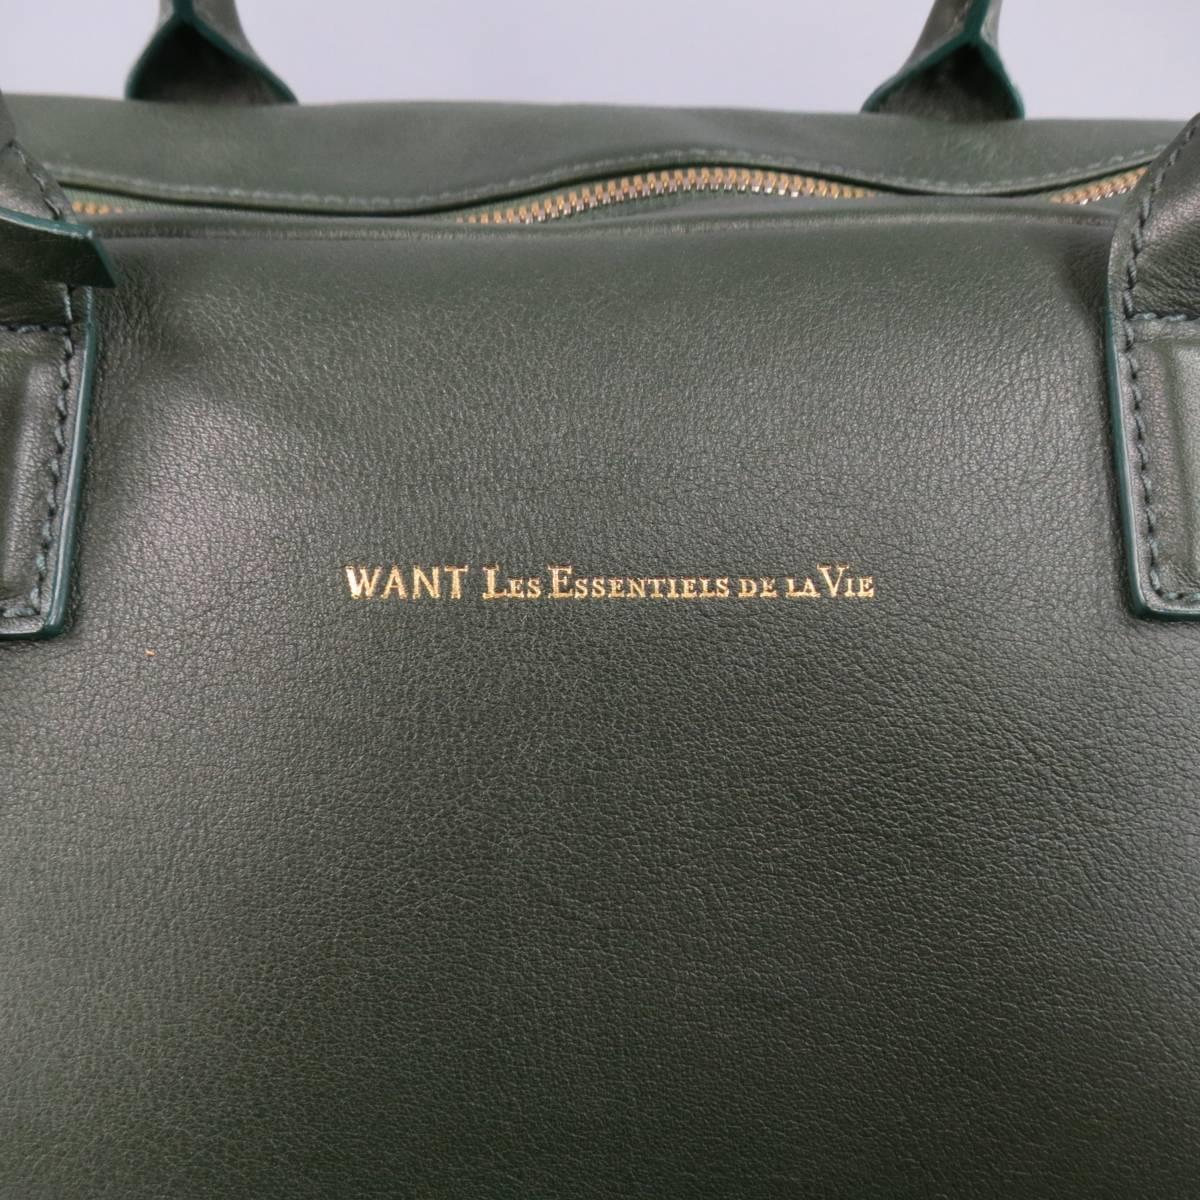 Classic duffle bag by WANT LES ESSENTIELS DE LA VIE in hunter green smooth leather featuring double top handles, gold metallic logo, silver and gold top zip closure, and detachable shoulder strap. Wear throughout leather and hole in shoulder strap.